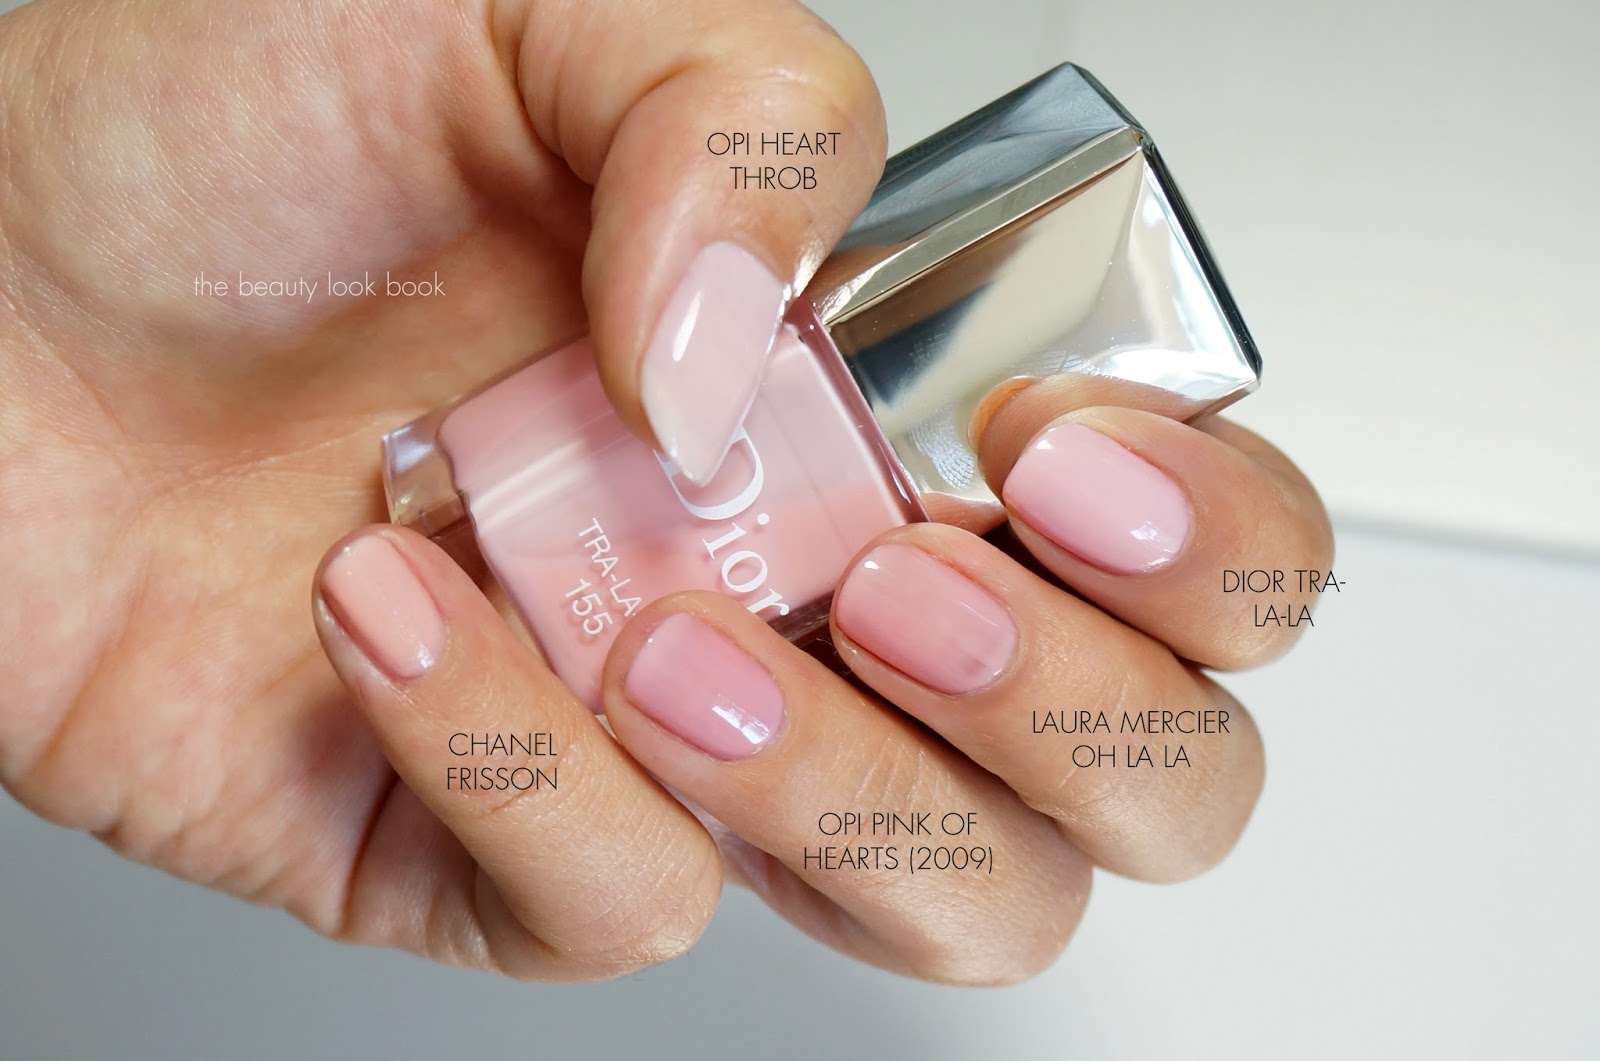 10. Dior Vernis Nail Lacquer in "New Look" - wide 5